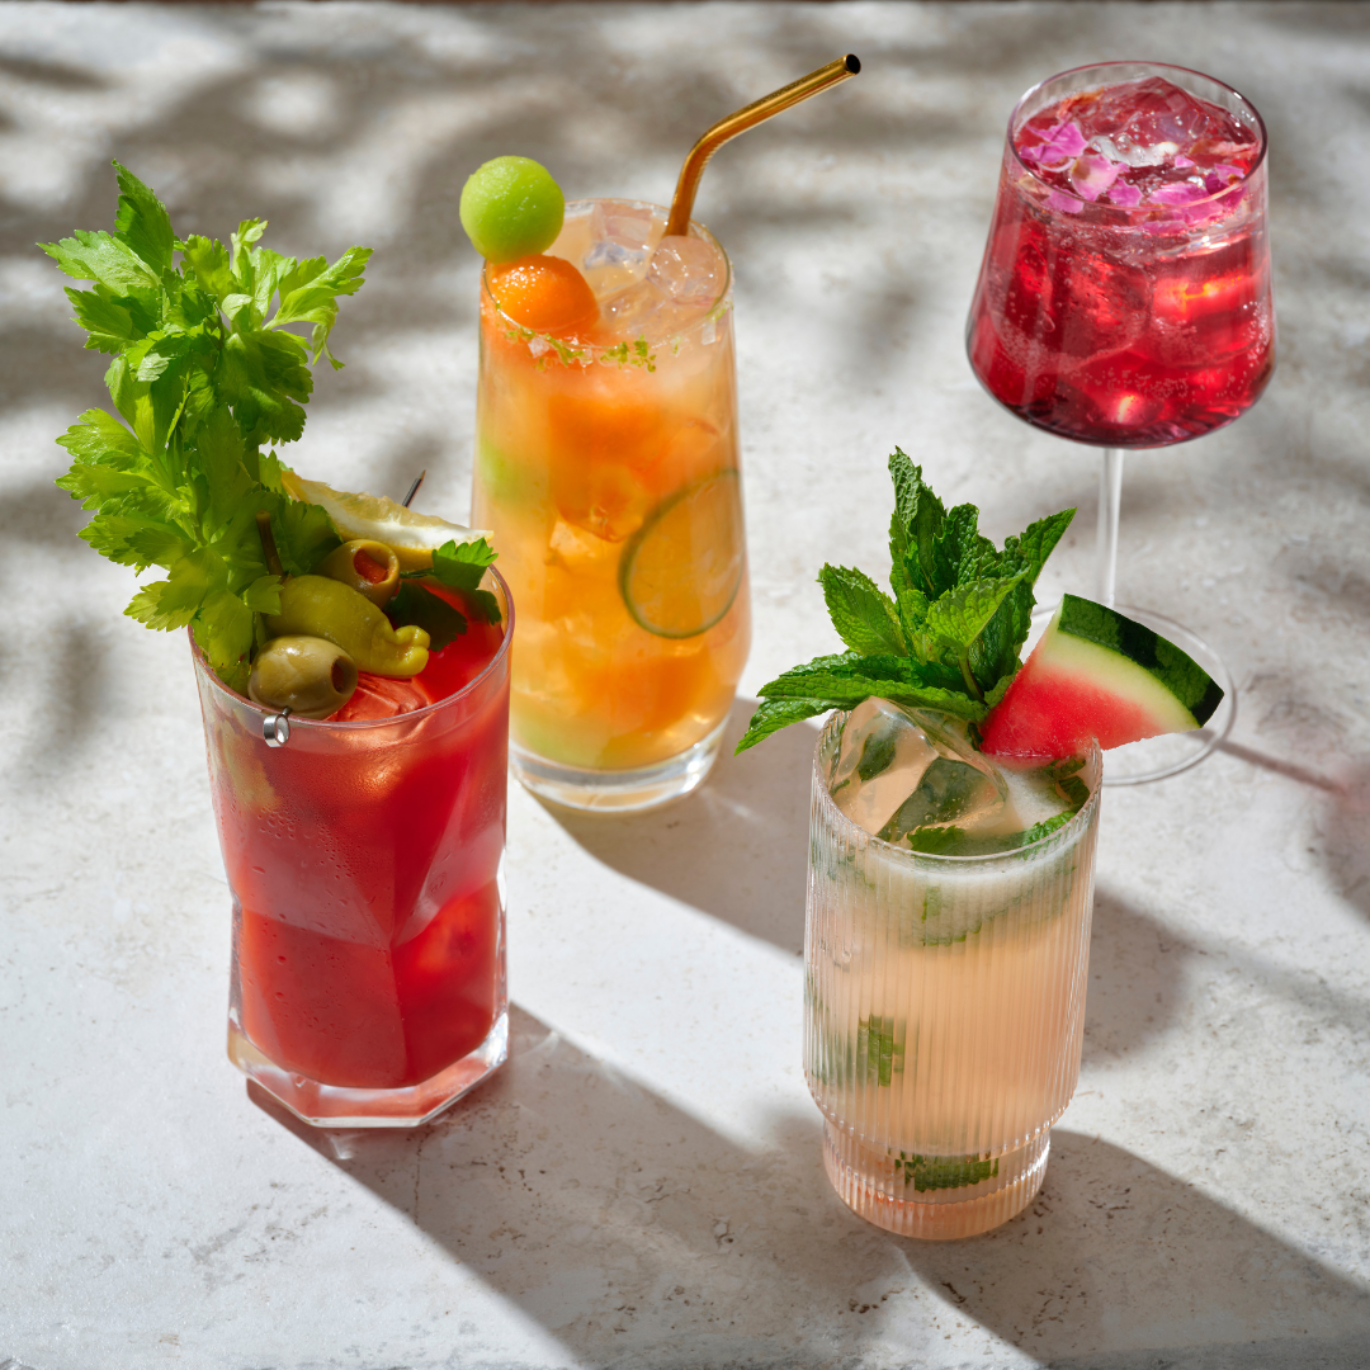 Are Mocktails Alcoholic?